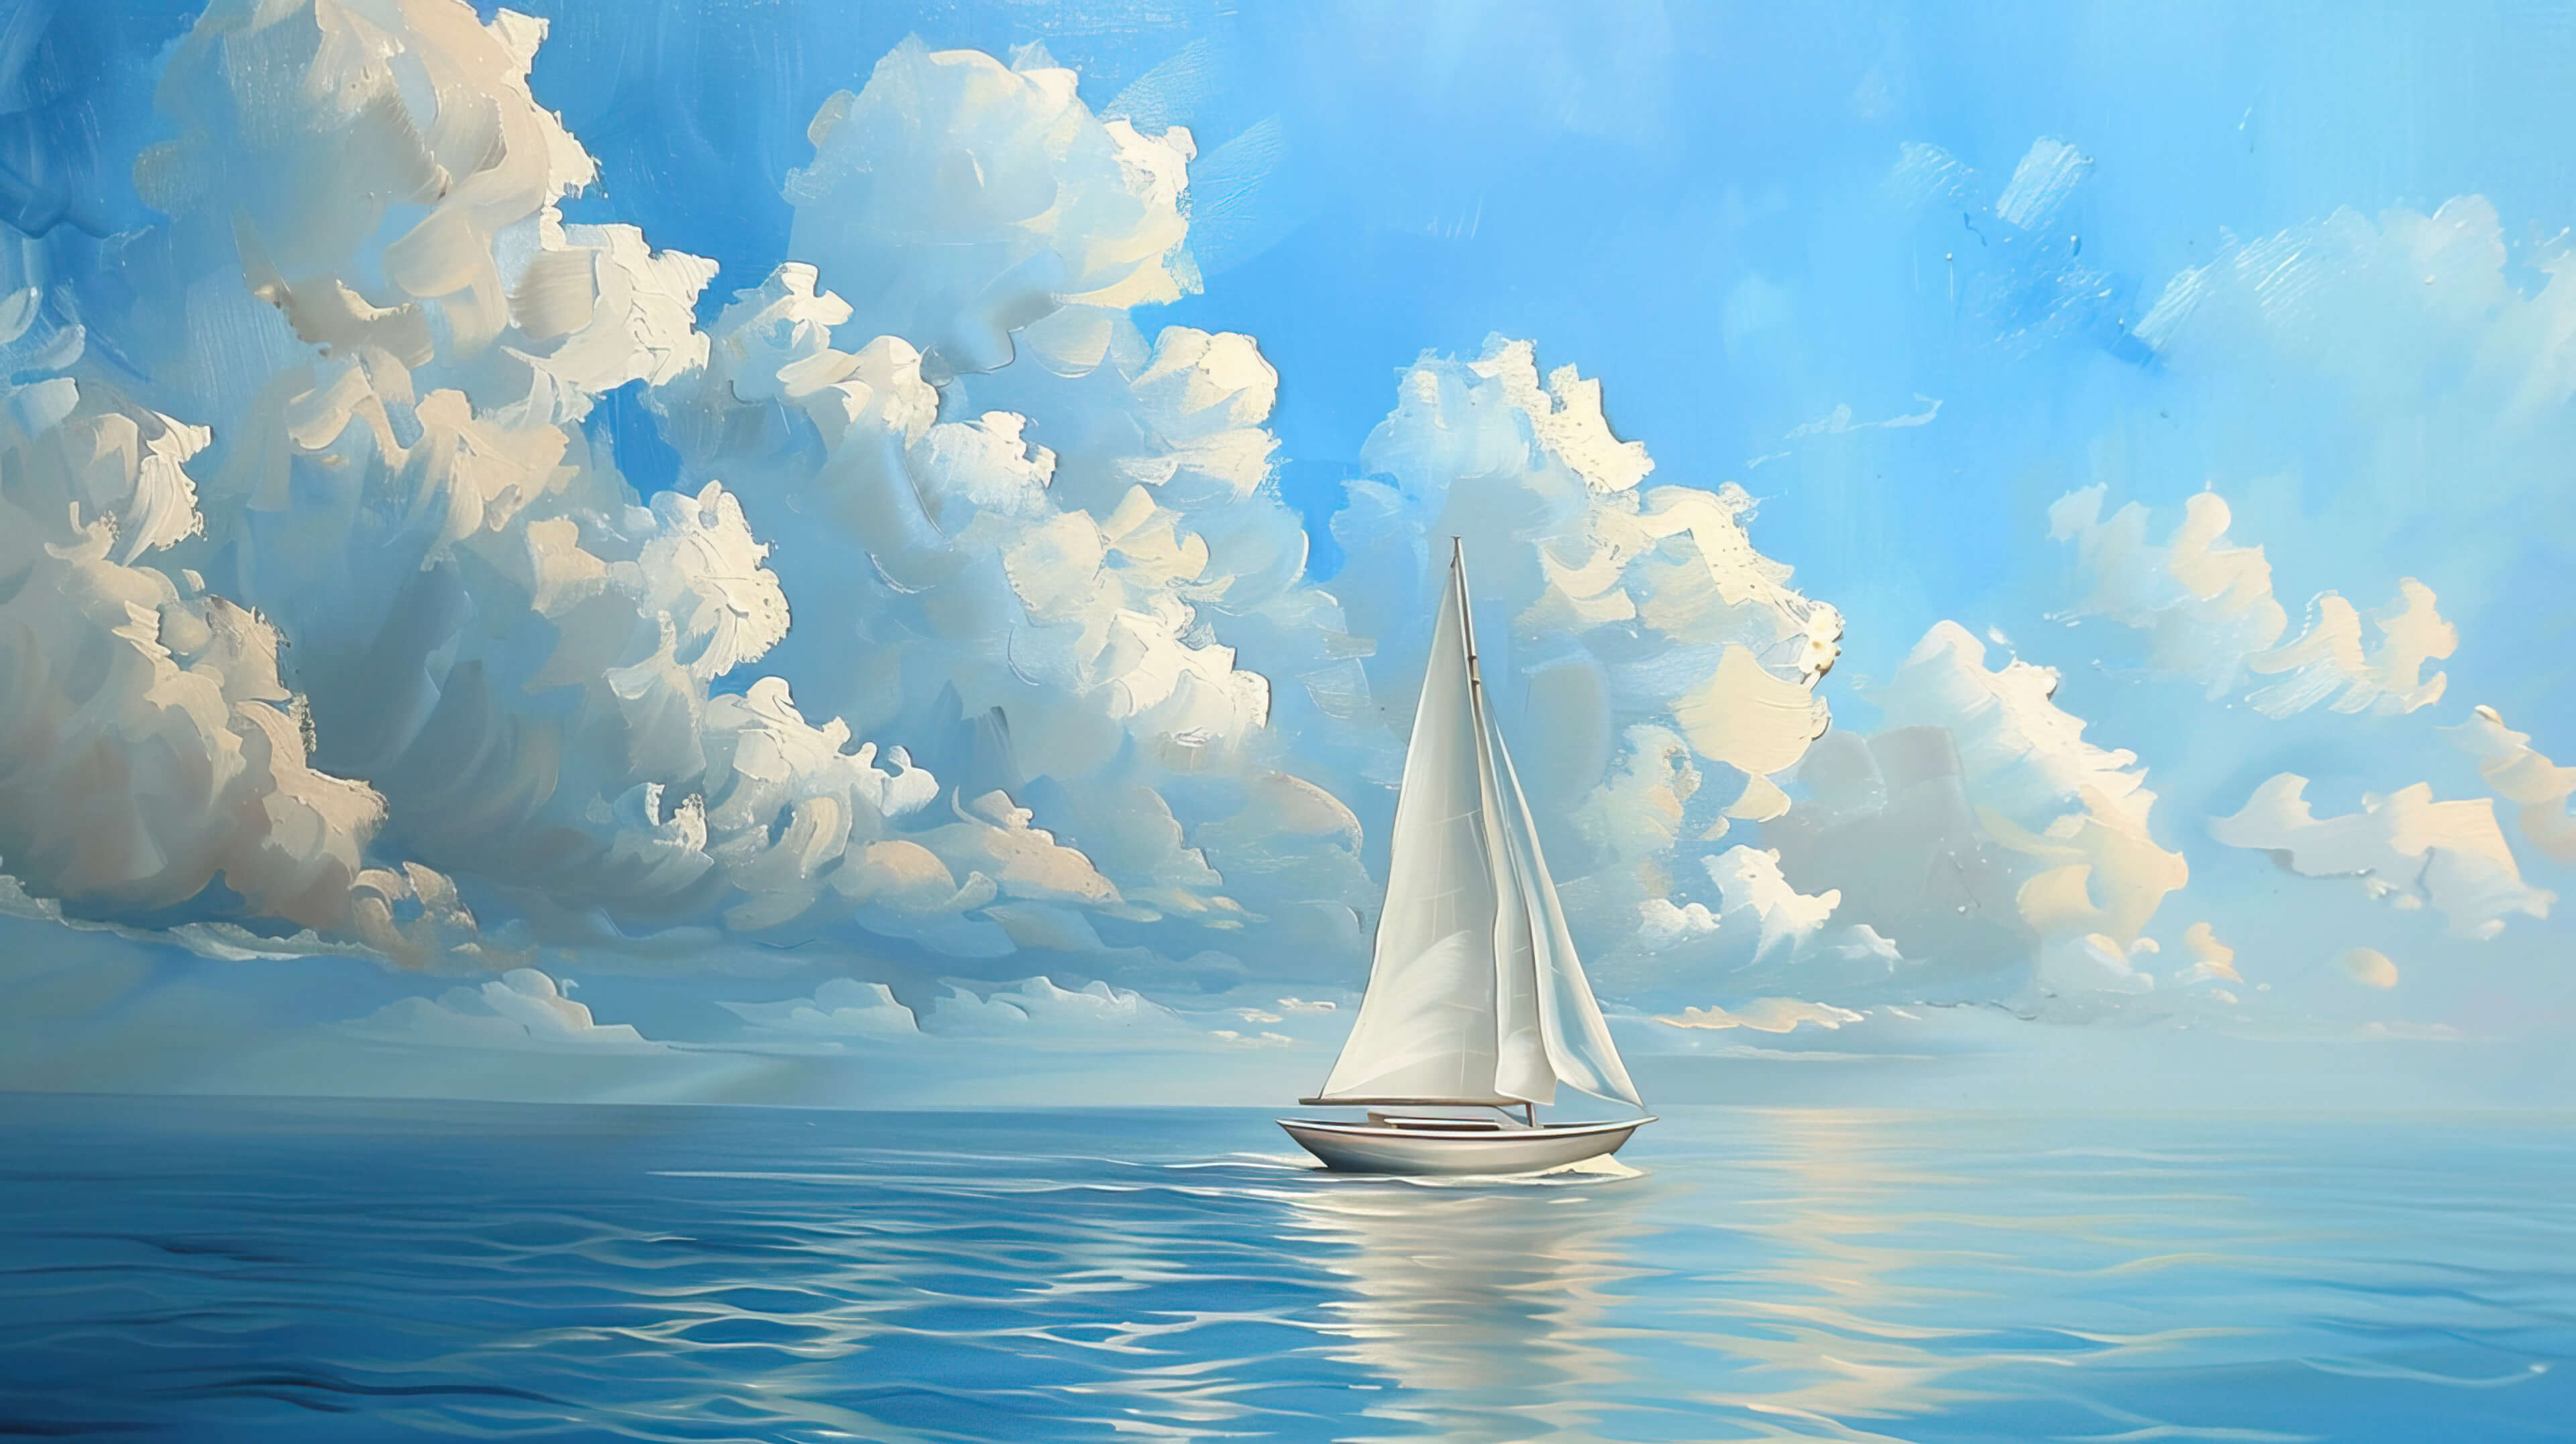 A tranquil seascape featuring a sailboat smoothly traversing peaceful waters its white sails gracefully catching the soft breeze under clear blue skies with fluffy clouds